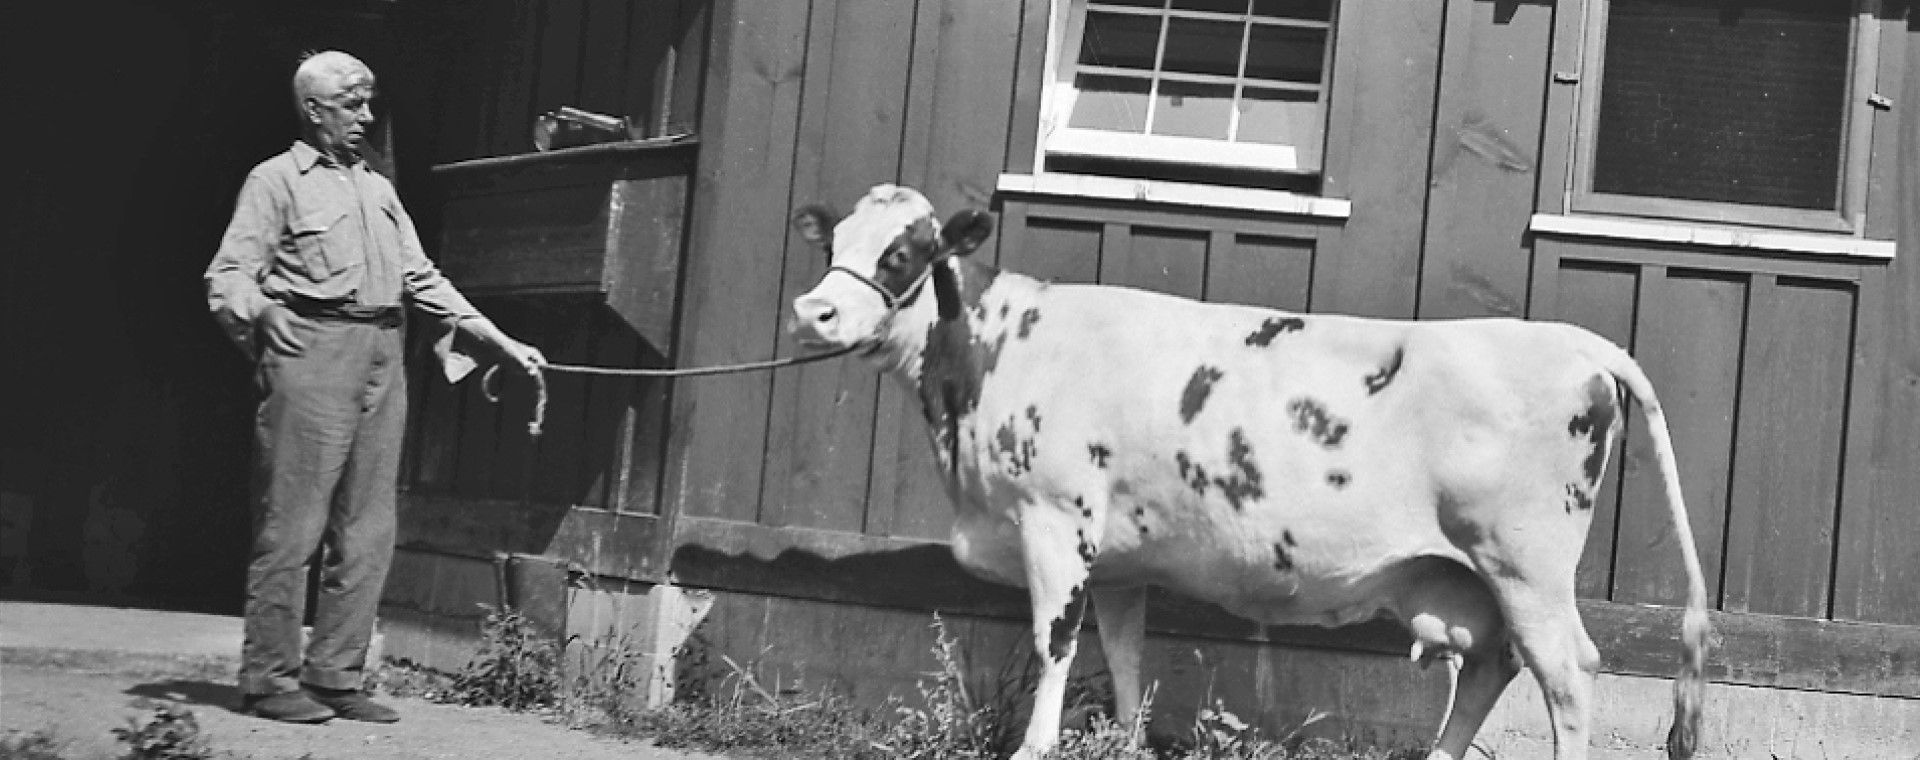 Black and white photo of a man looking surprised, holding a cow by a rope. A wooden building is in the background.